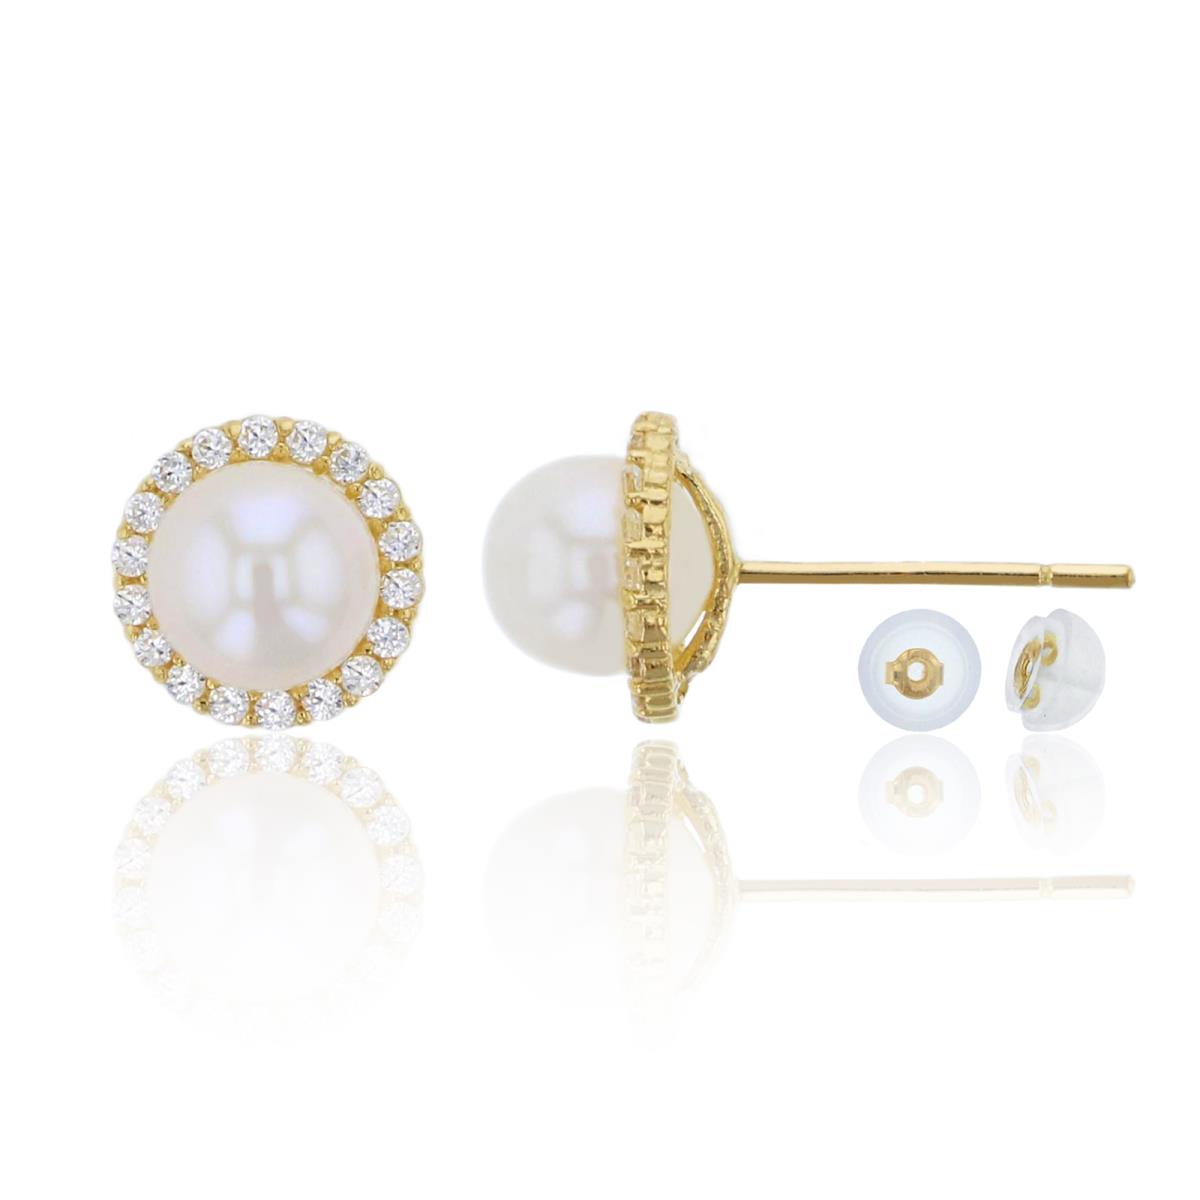 10K Yellow Gold 5mm Fresh Water Pearl & CZ Stud Earring & 10K Silicone Back